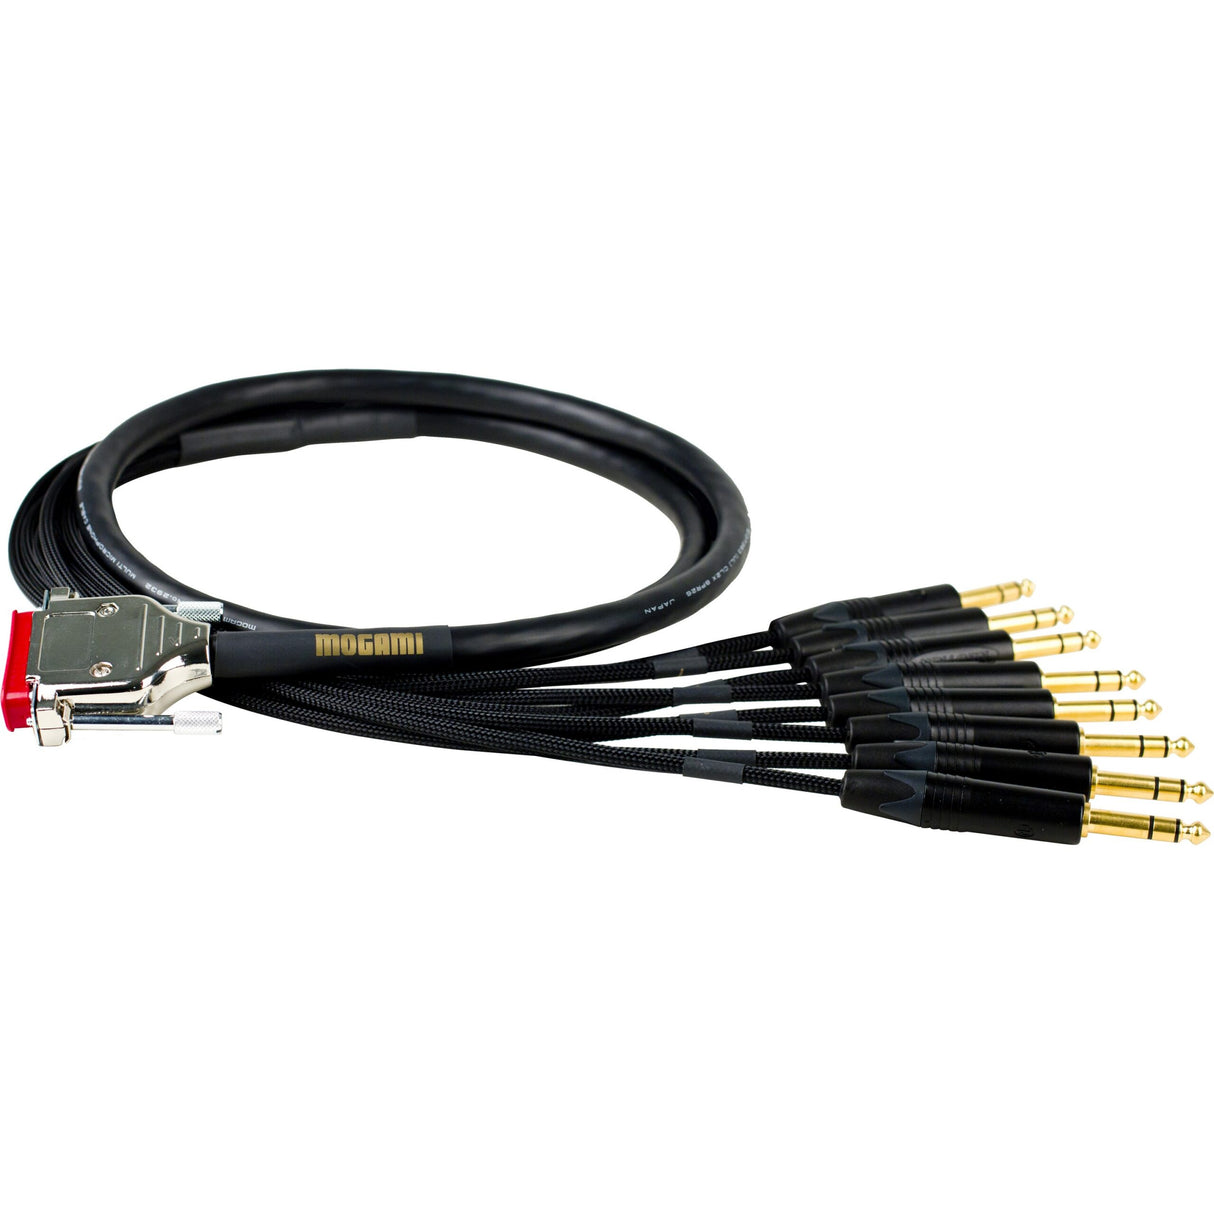 Mogami GOLD DB25-TRS-30 8-Channel Gold DB25 to TRS Male Analog Interface Cable, 30-Feet